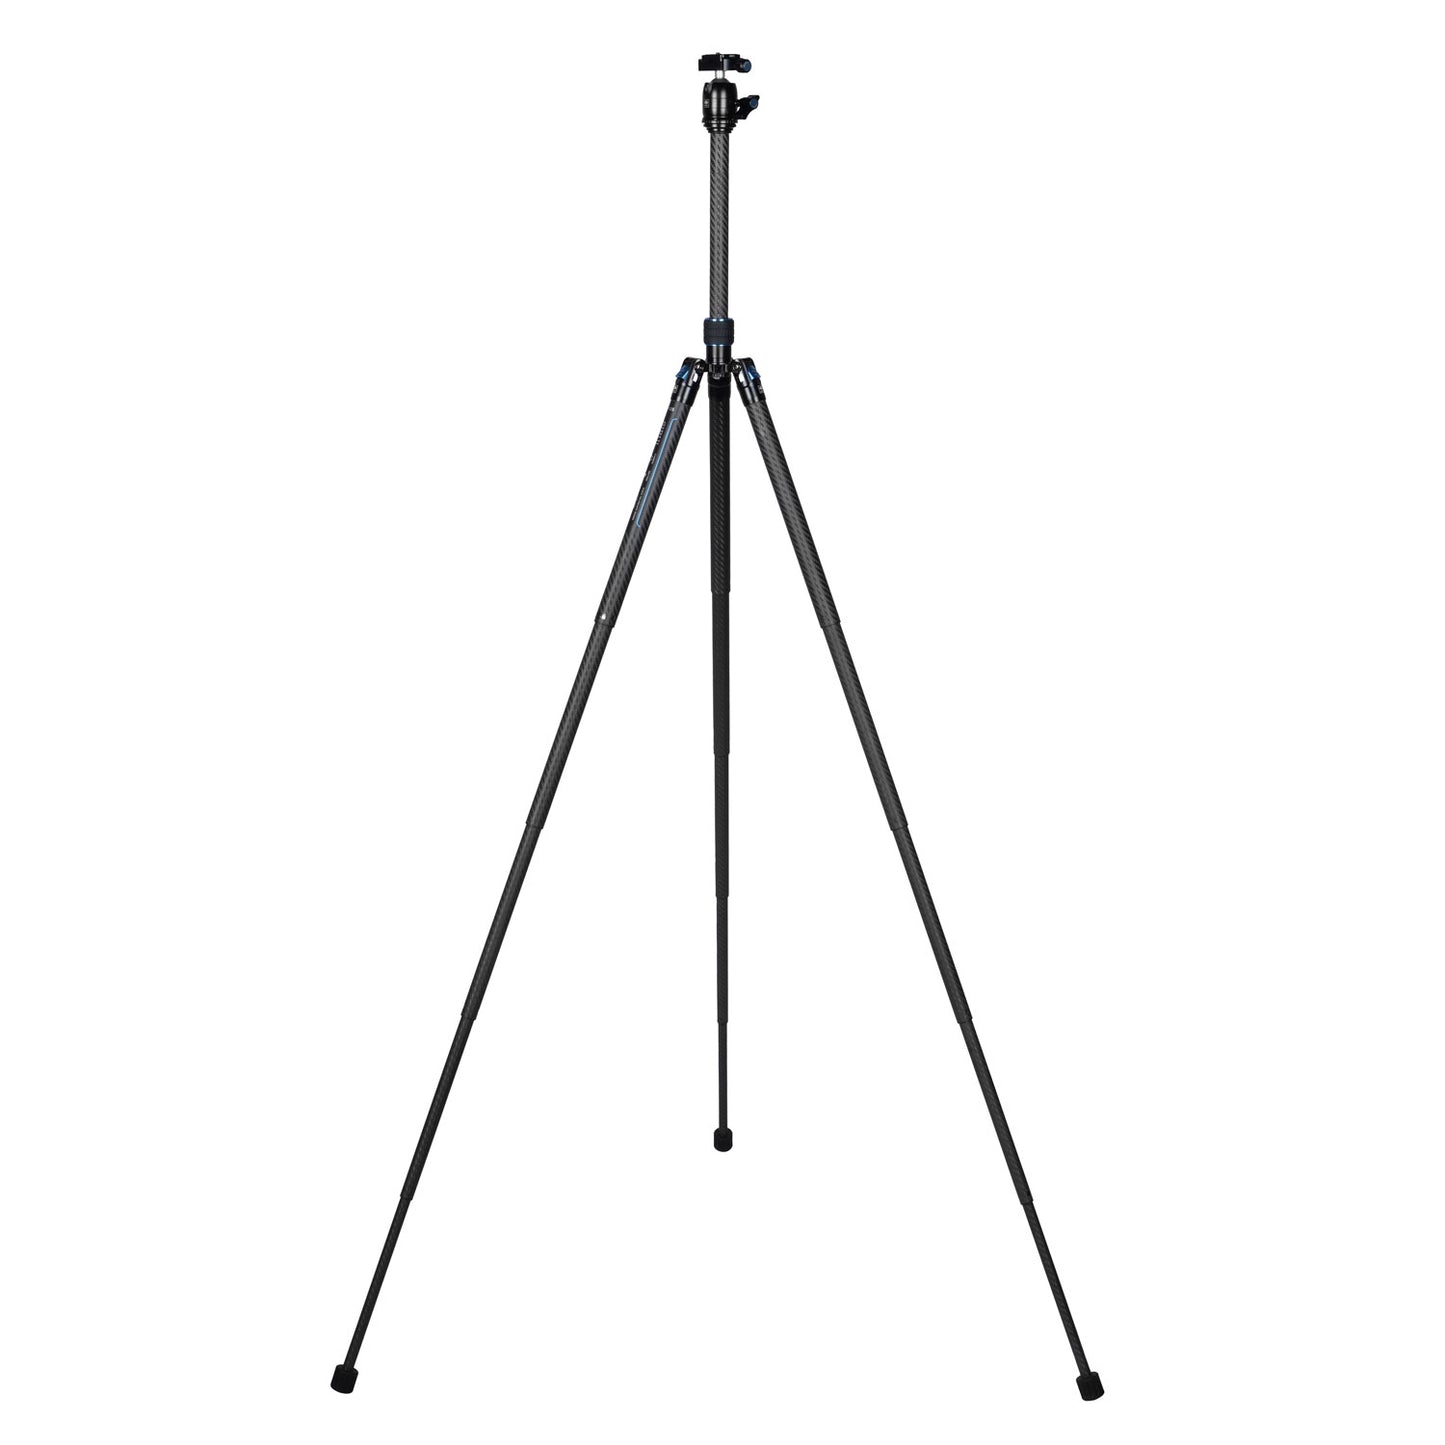 SIRUI Traveler X-I Compact - Travel tripod carbon with small ball head - ultra light & super compact